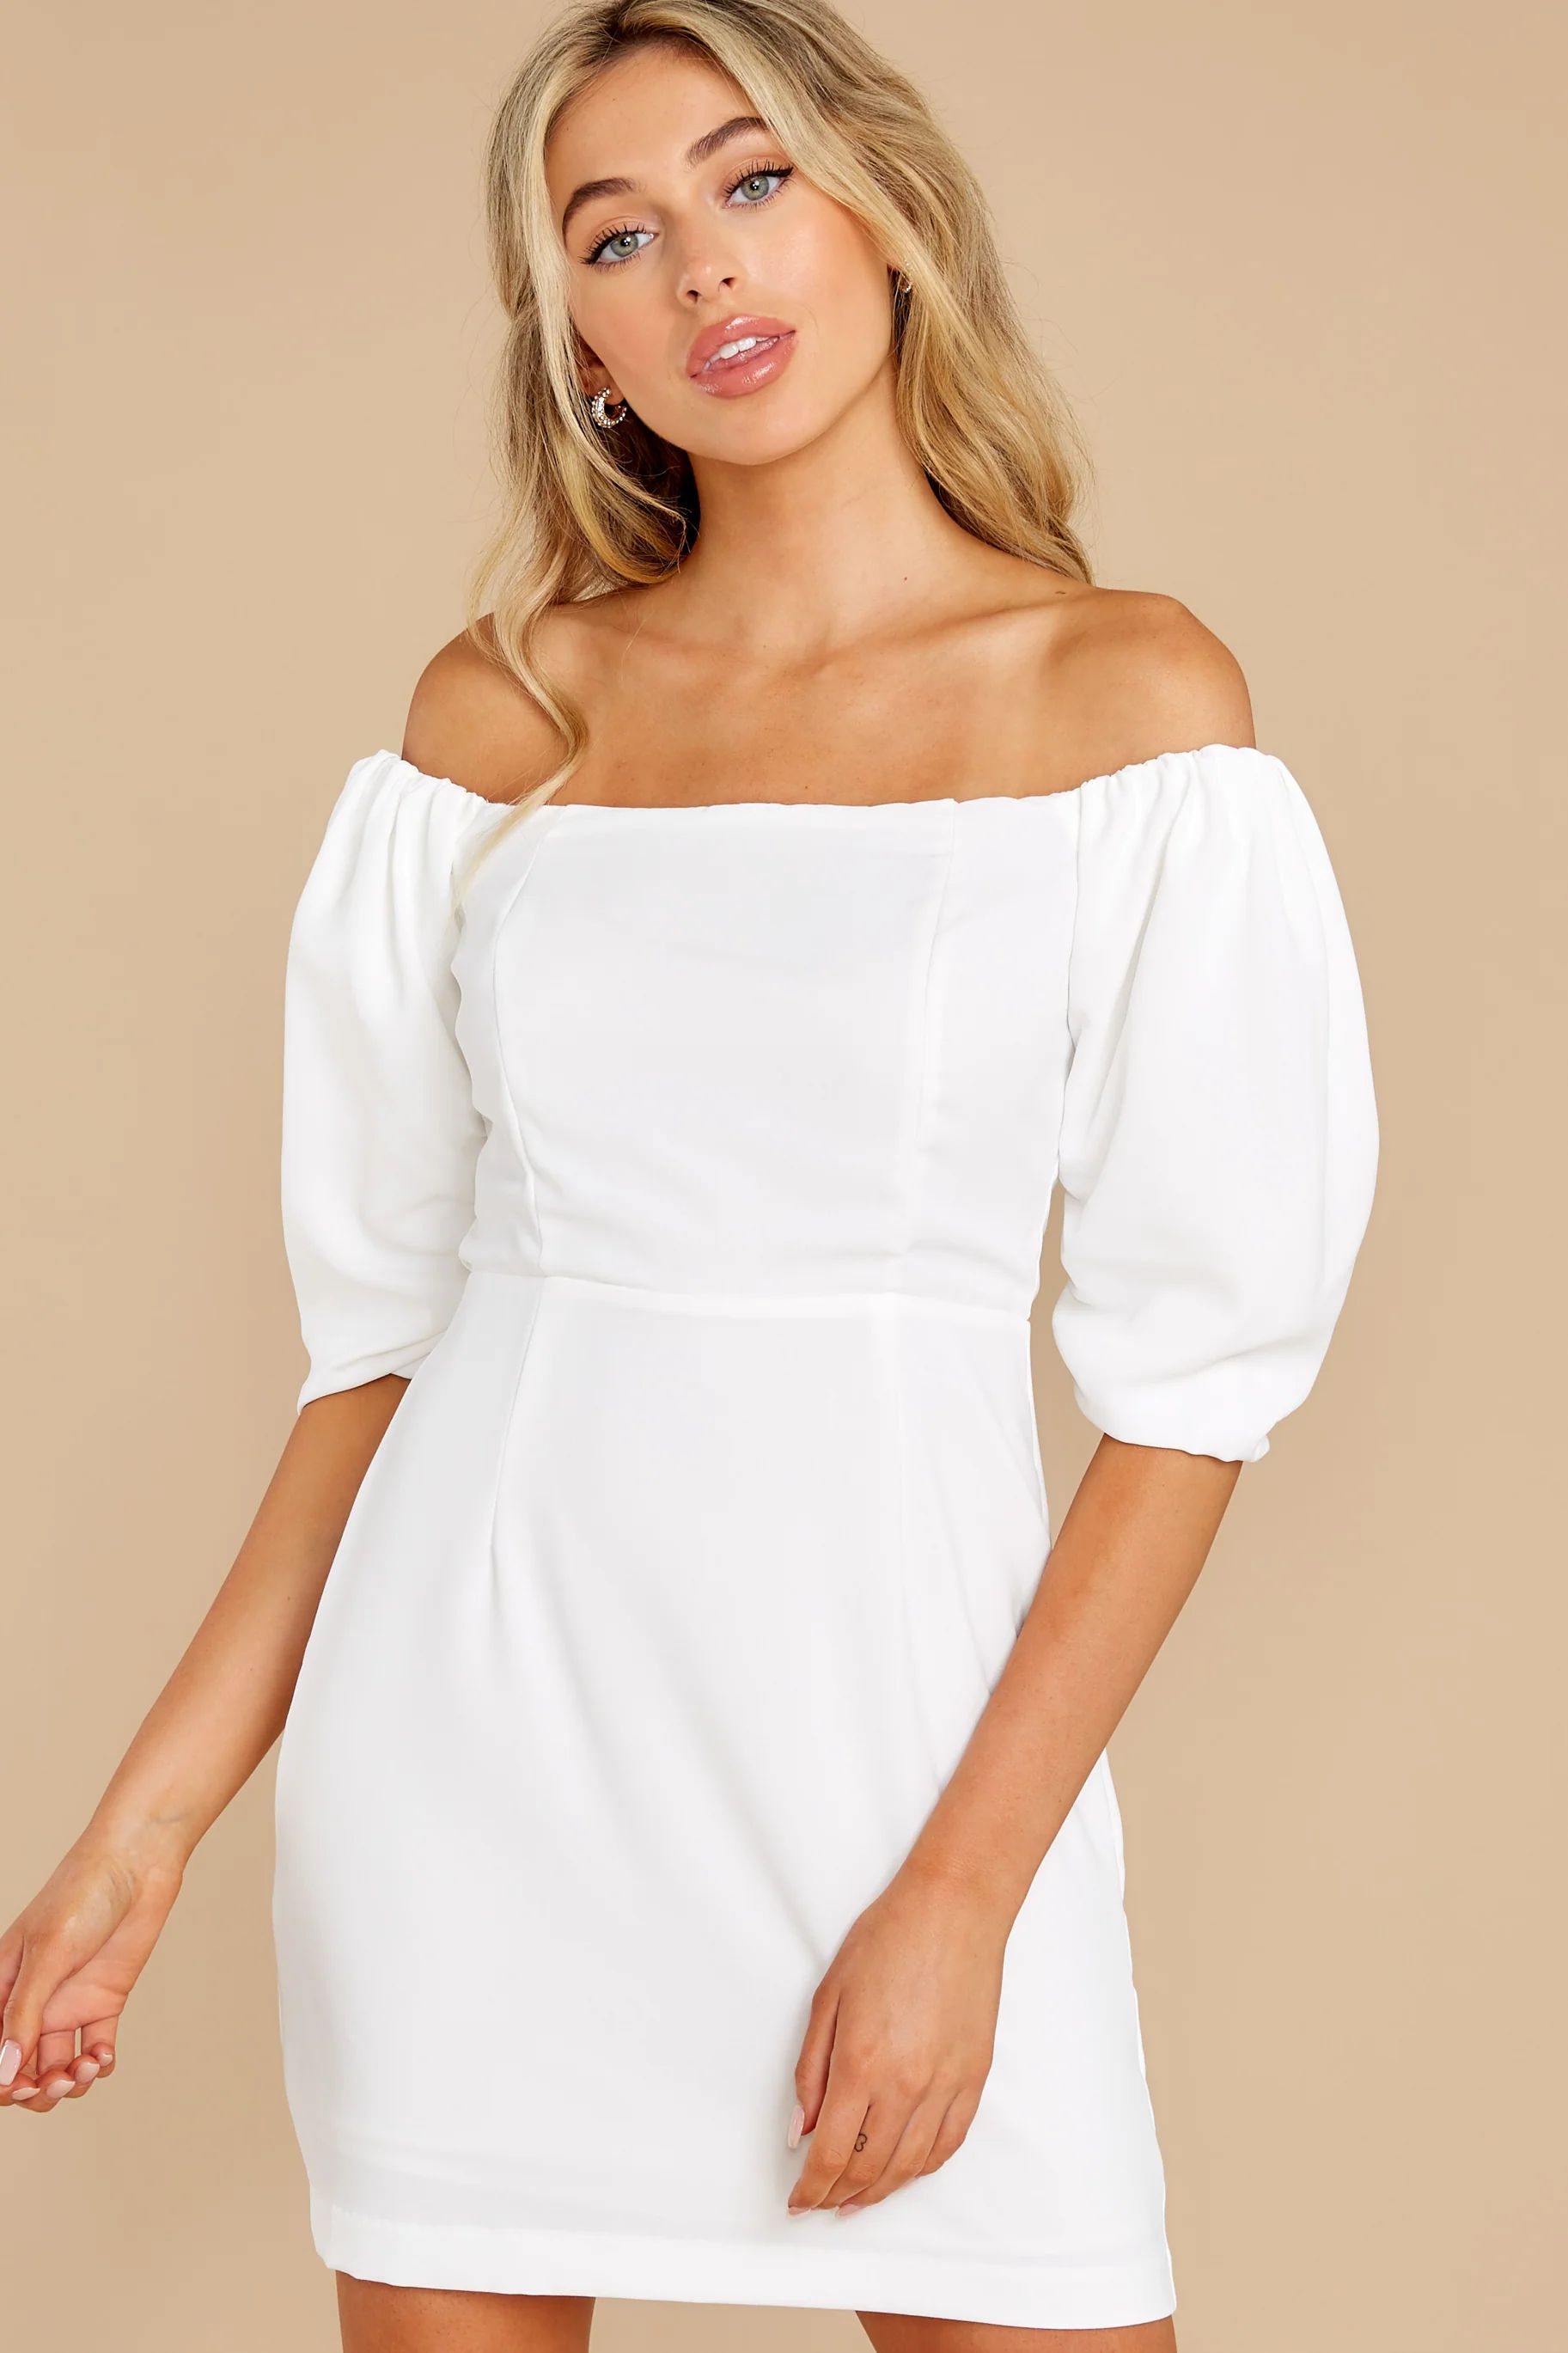 Lofty Ambitions White Off The Shoulder Dress | Red Dress 